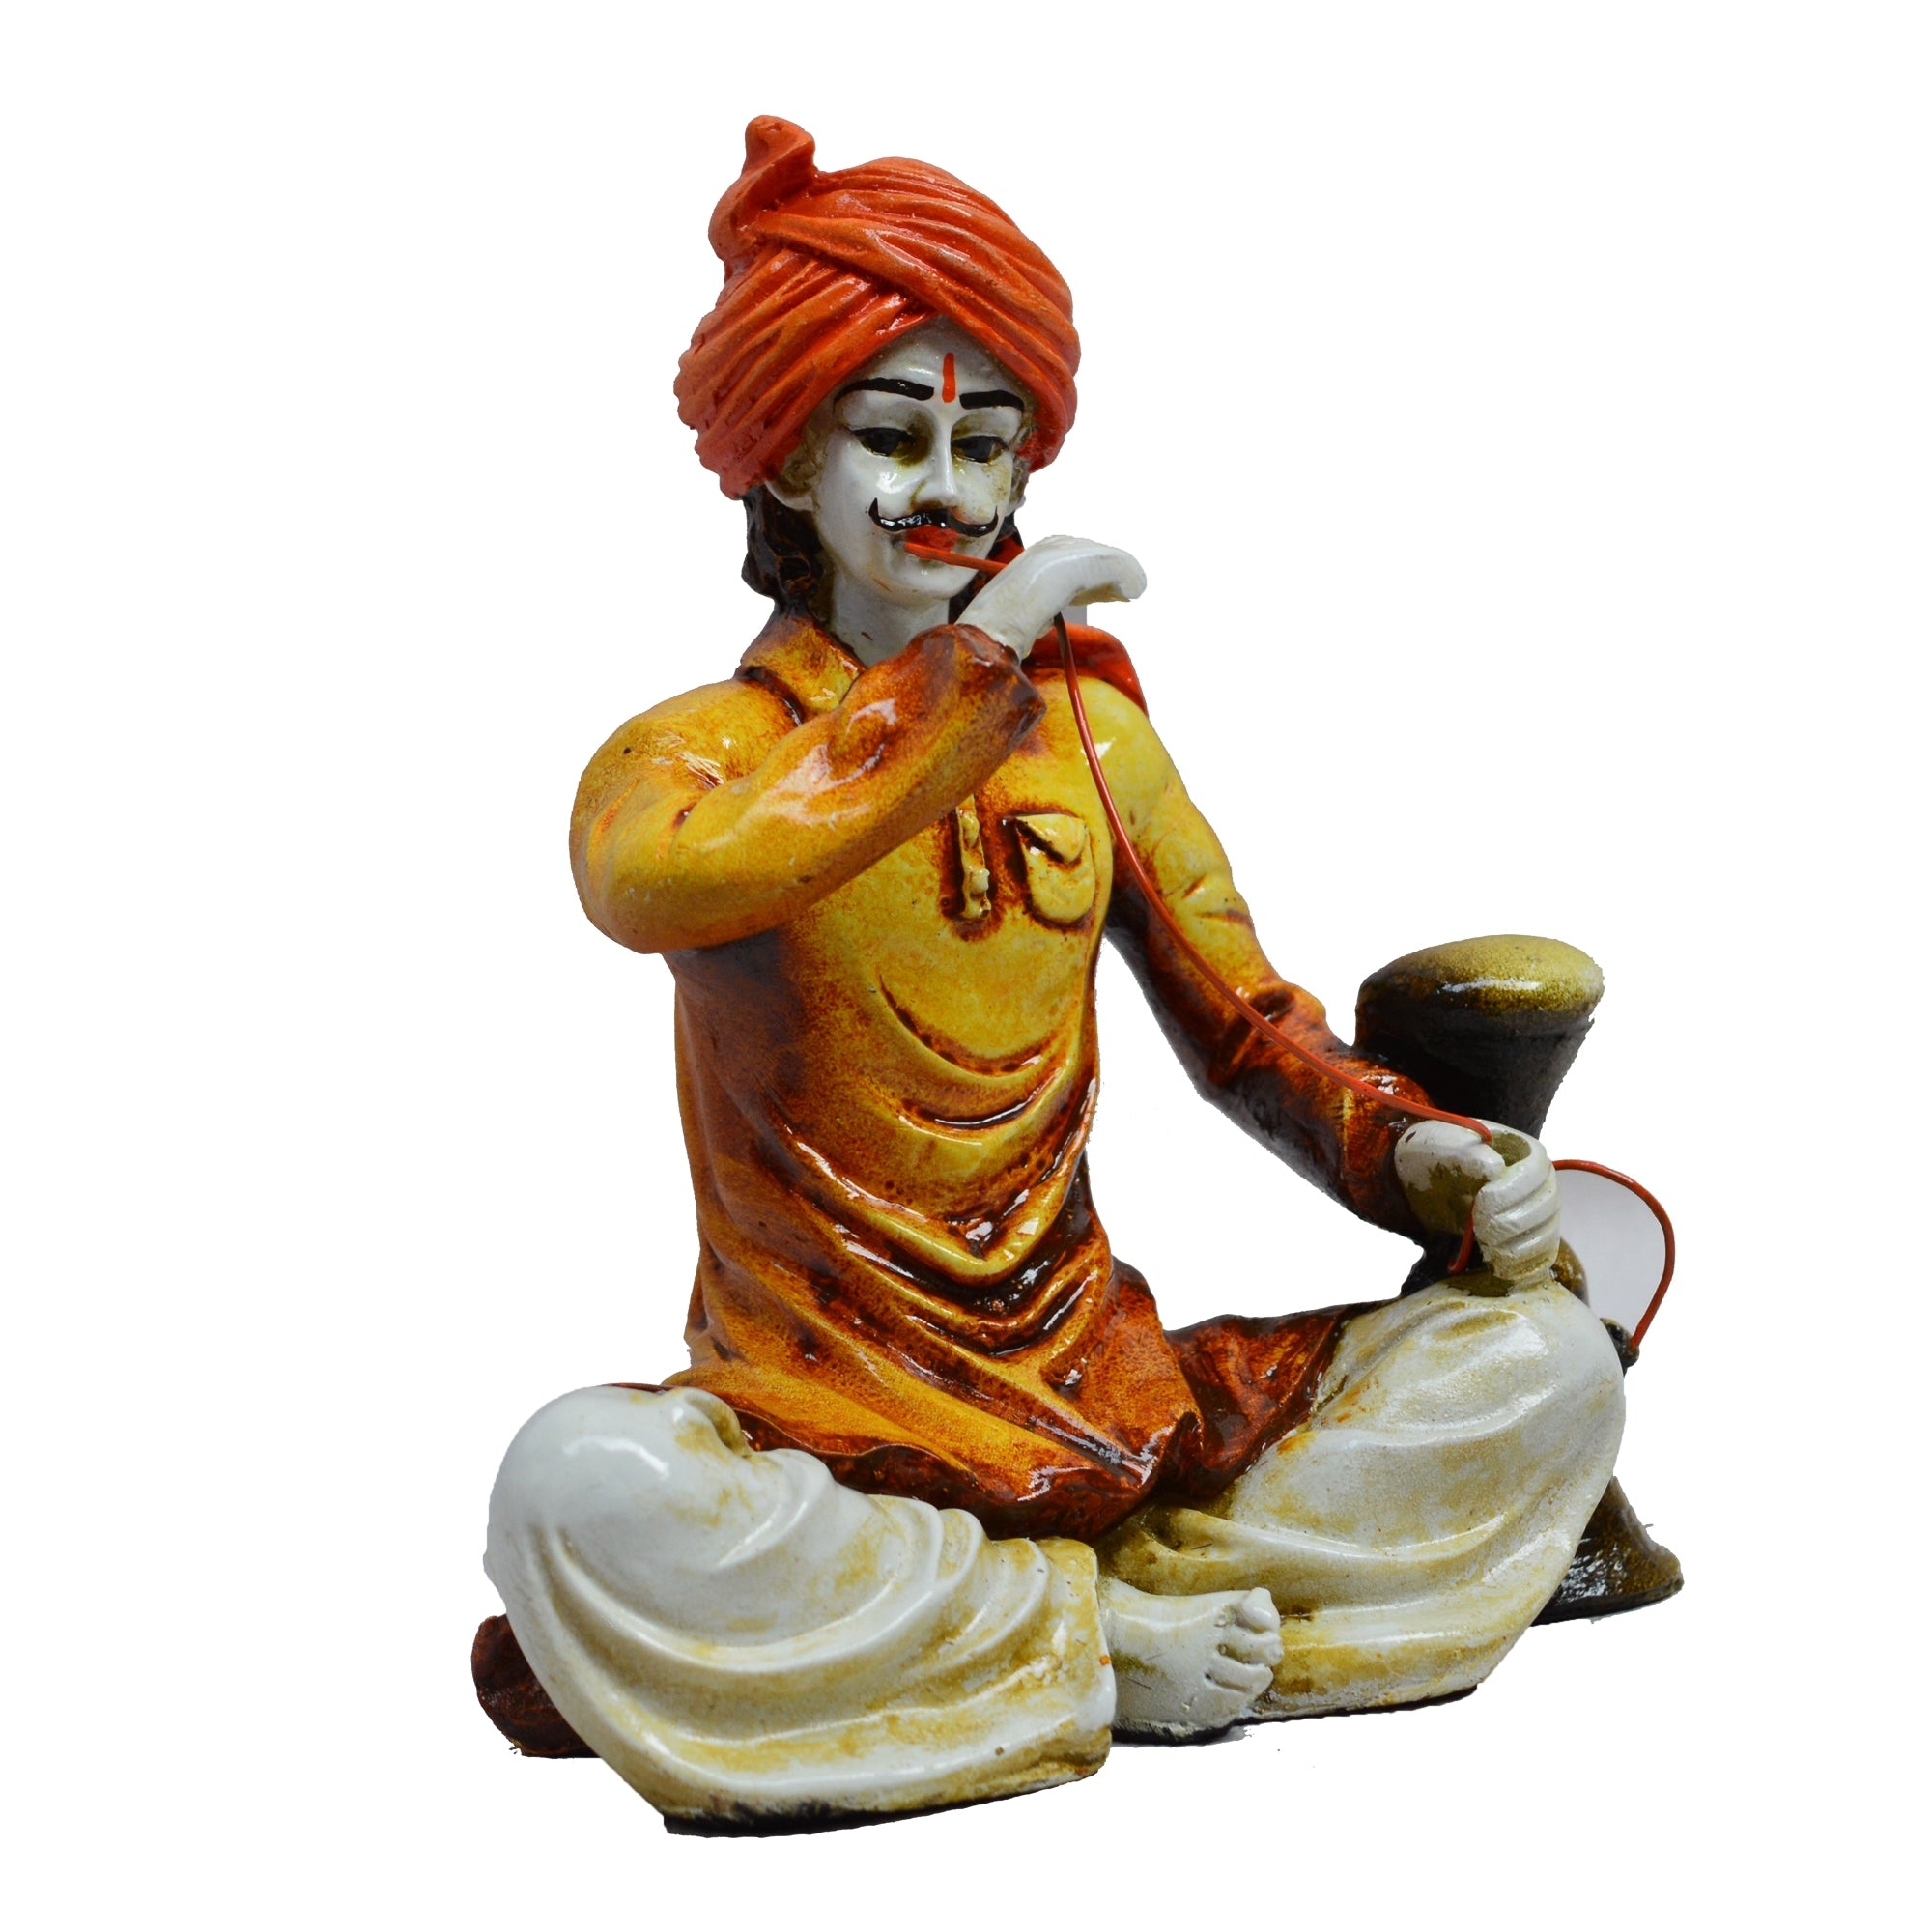 Polyresin Rajasthani Man Using Hookah Handcrafted Decorative Showpiece (Yellow, Orange and Brown) 1